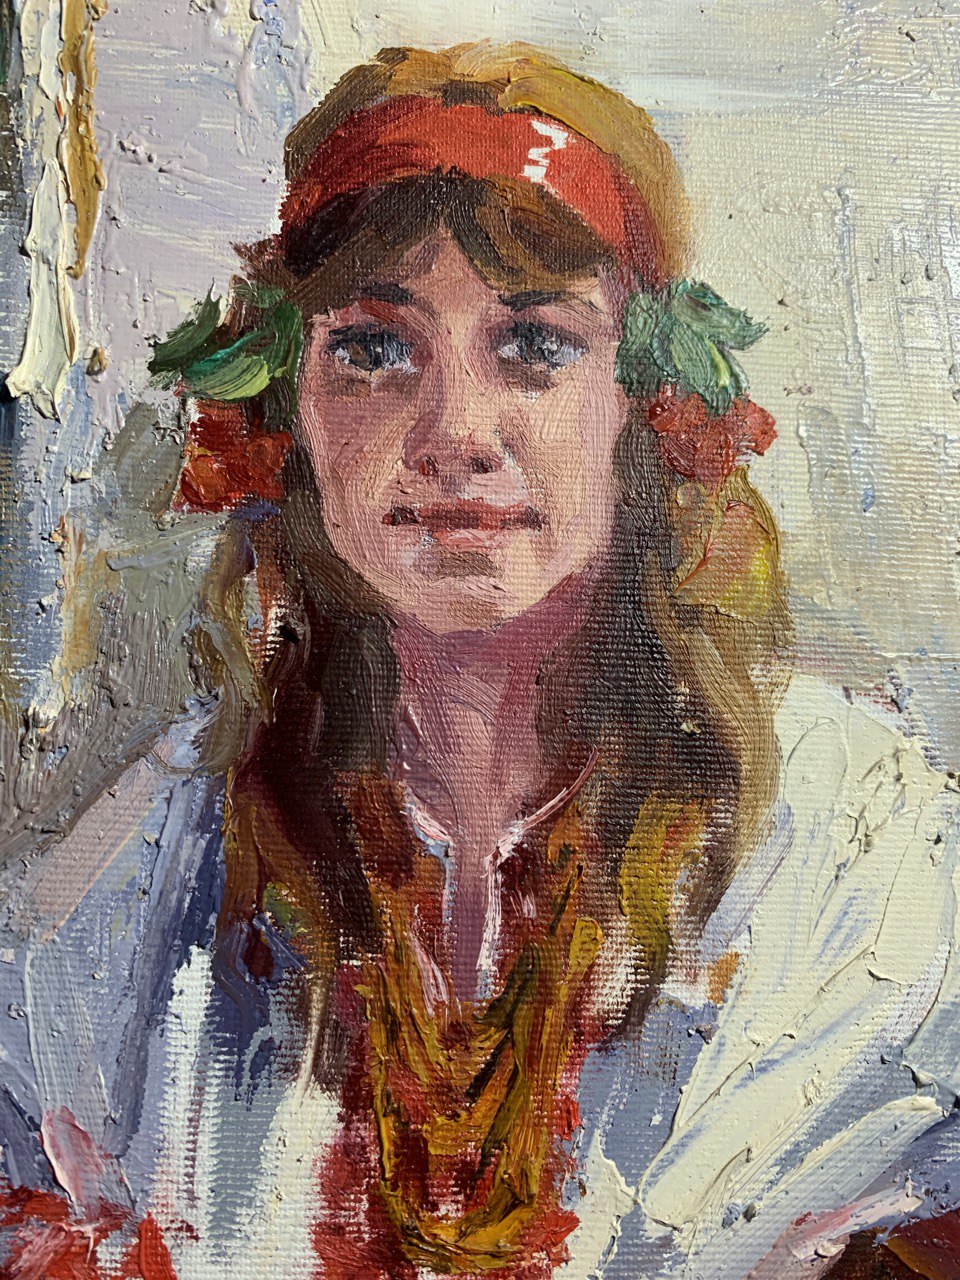 Alexander Nikolaevich Cherednichenko's oil painting, "A Young Gypsy"